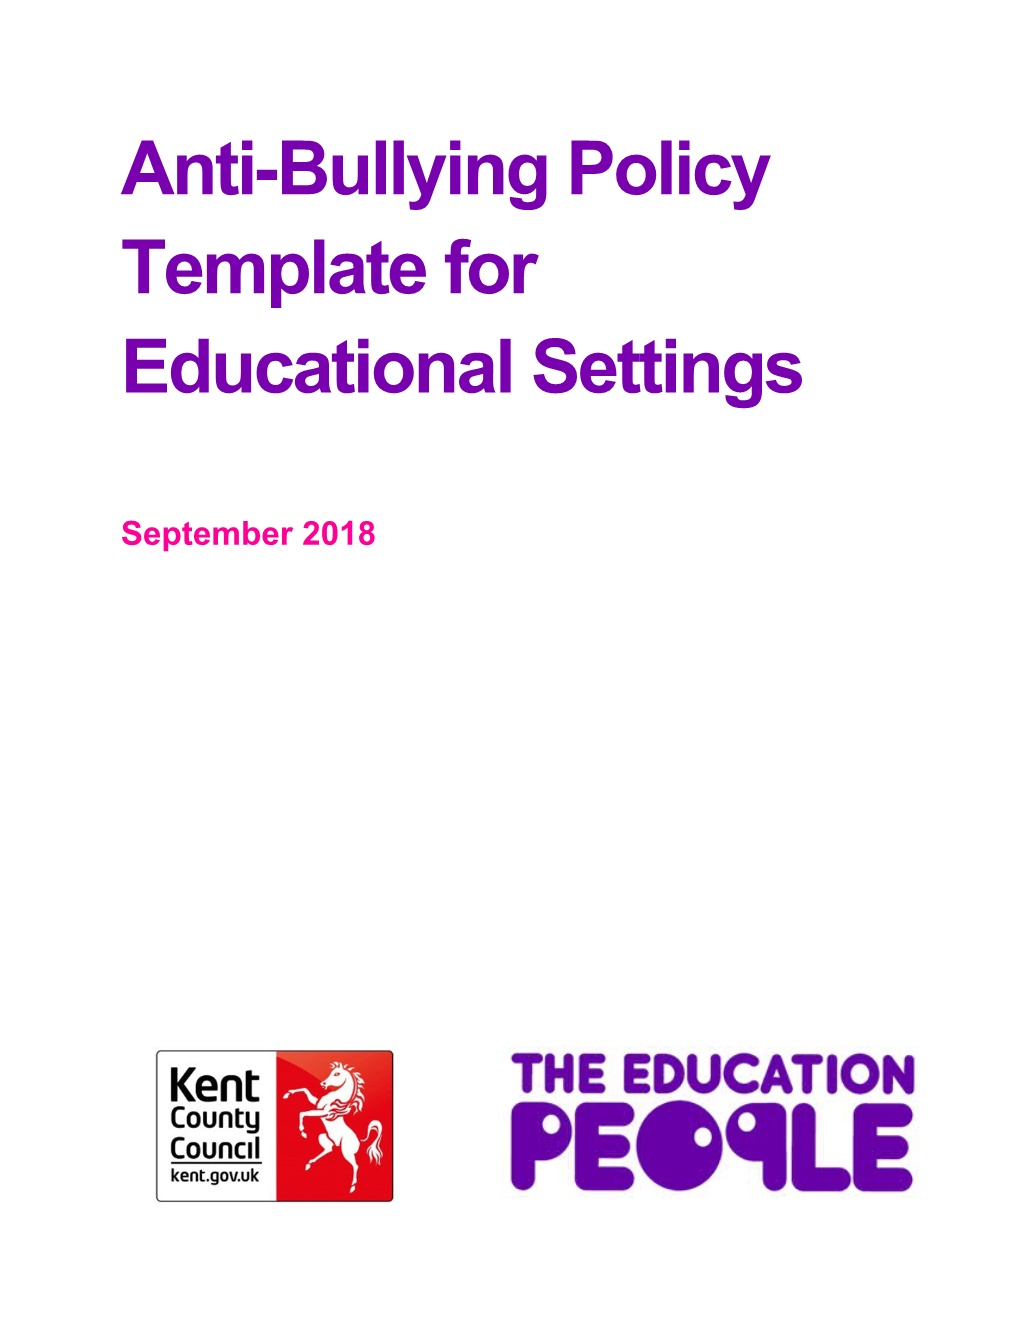 Anti-Bullying Policy Template for Educational Settings